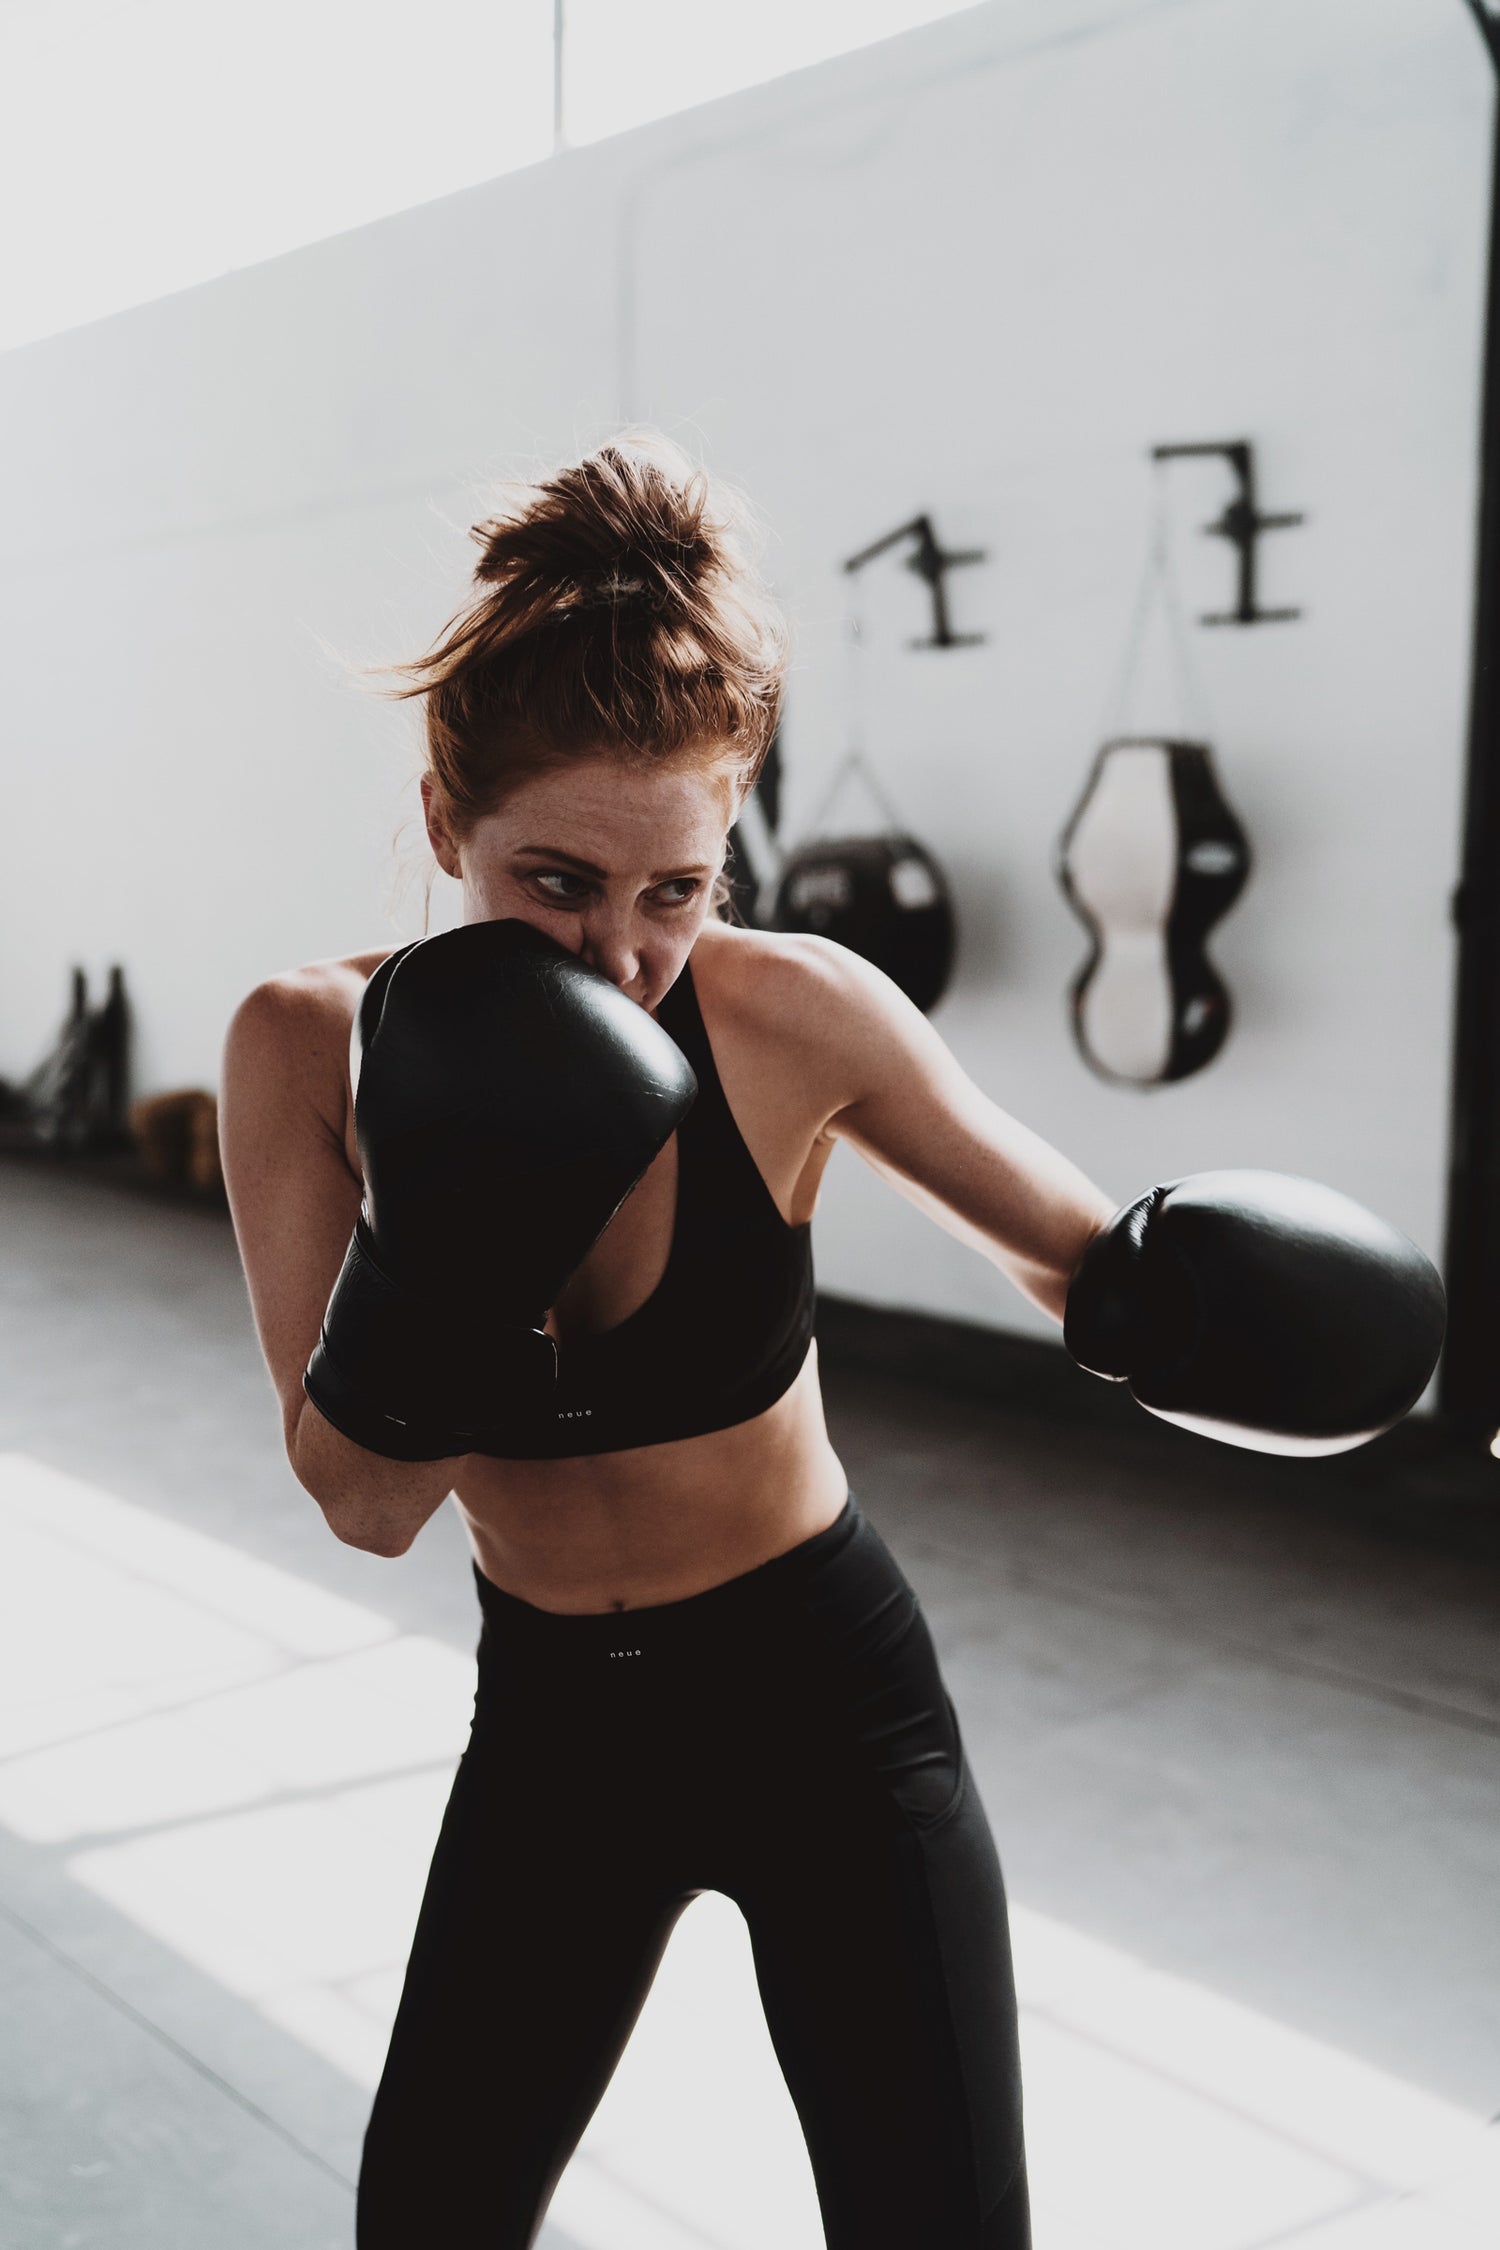 Neue Supply Co. woman boxing in all-black sports bra and leggings